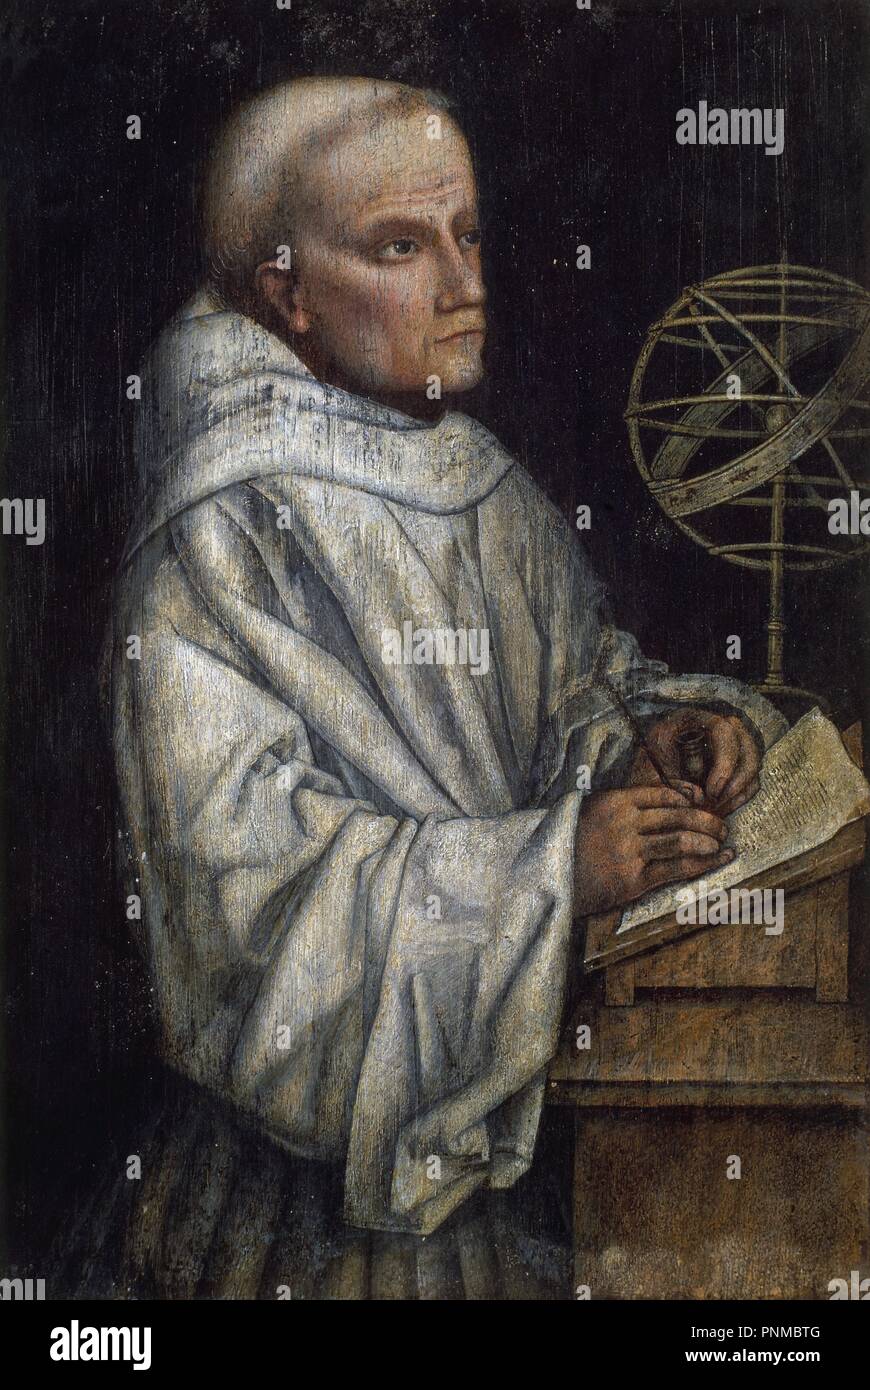 SANCHO DE SALAYA (1469-?) ASTROLOGY PROFESSOR AND DOCTOR OF THE INQUISITION COUNCIL. Location: MUSEO NAVAL / MINISTERIO DE MARINA. MADRID. SPAIN. Stock Photo